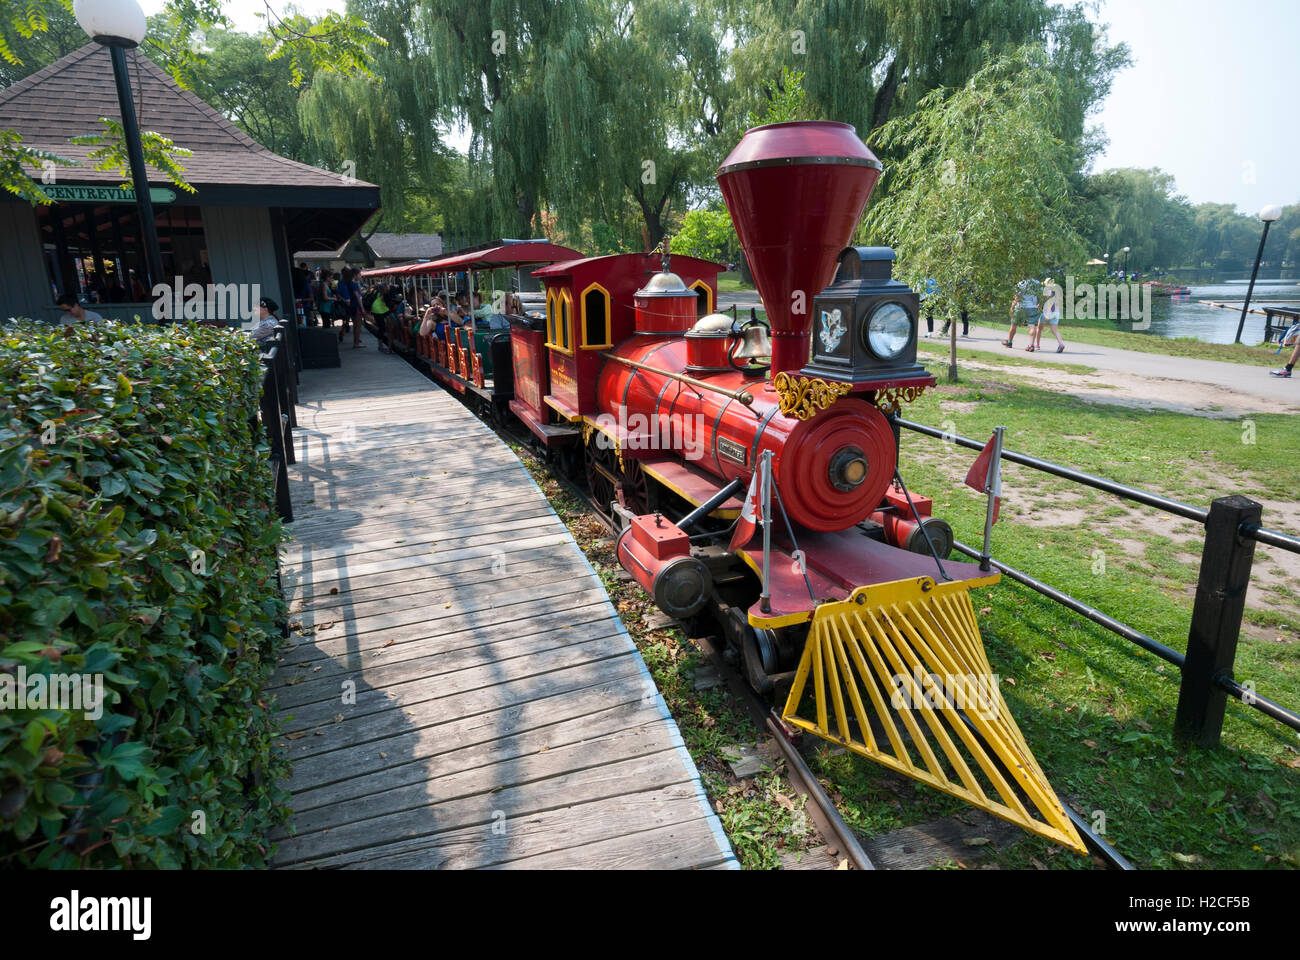 The well-known Centreville miniature train ride at Centreville amusement park on the Toronto Island park. Toronto Ontario Canada Stock Photo